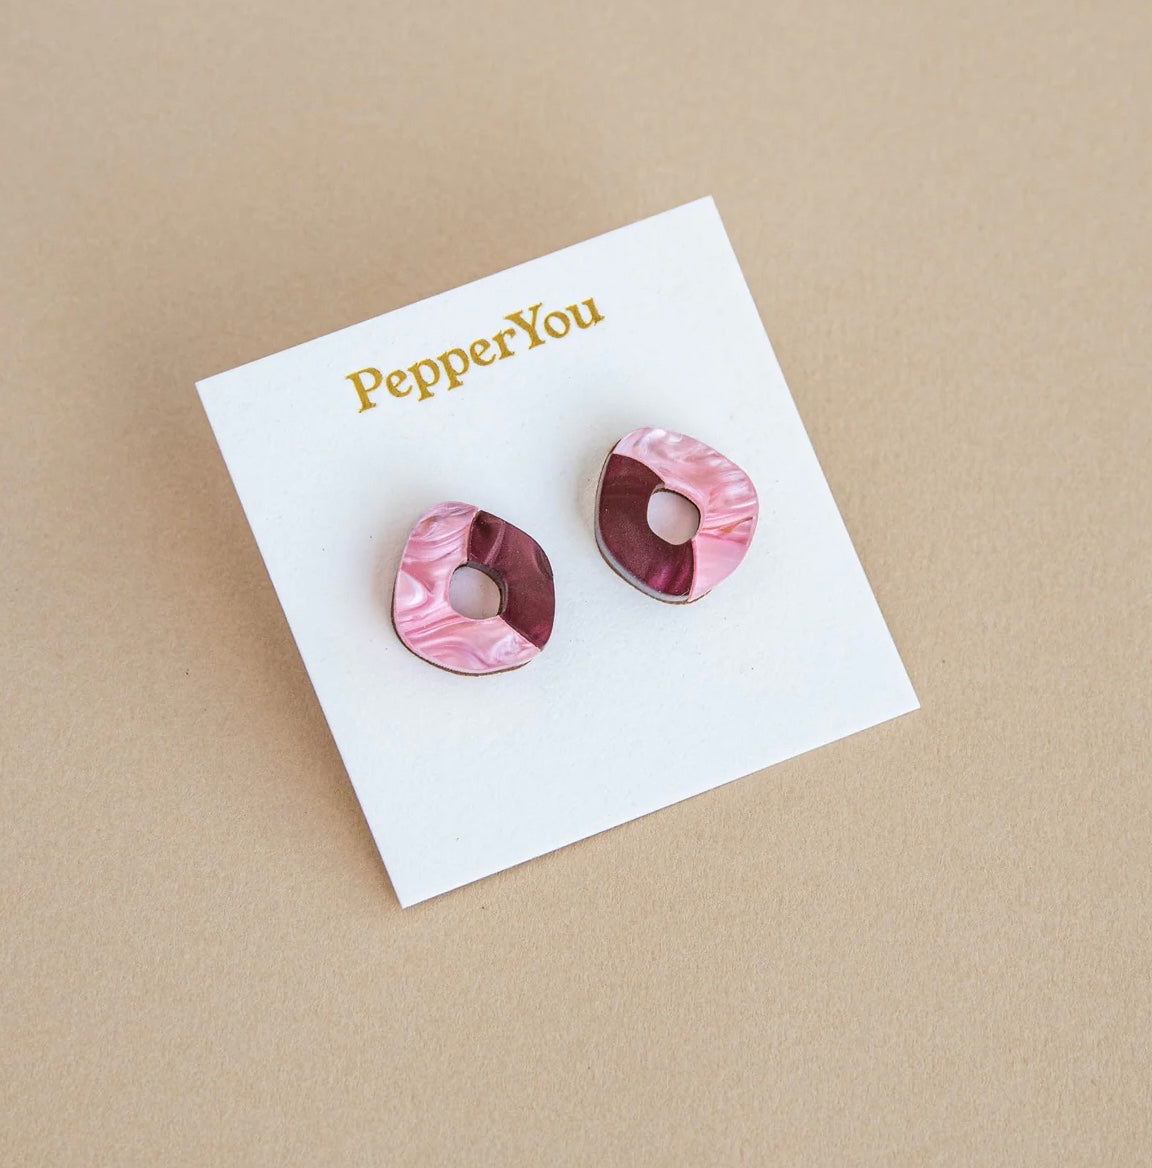 'Oh' Stud Earrings in Berry & Pink - THE BRISTOL ARTISAN